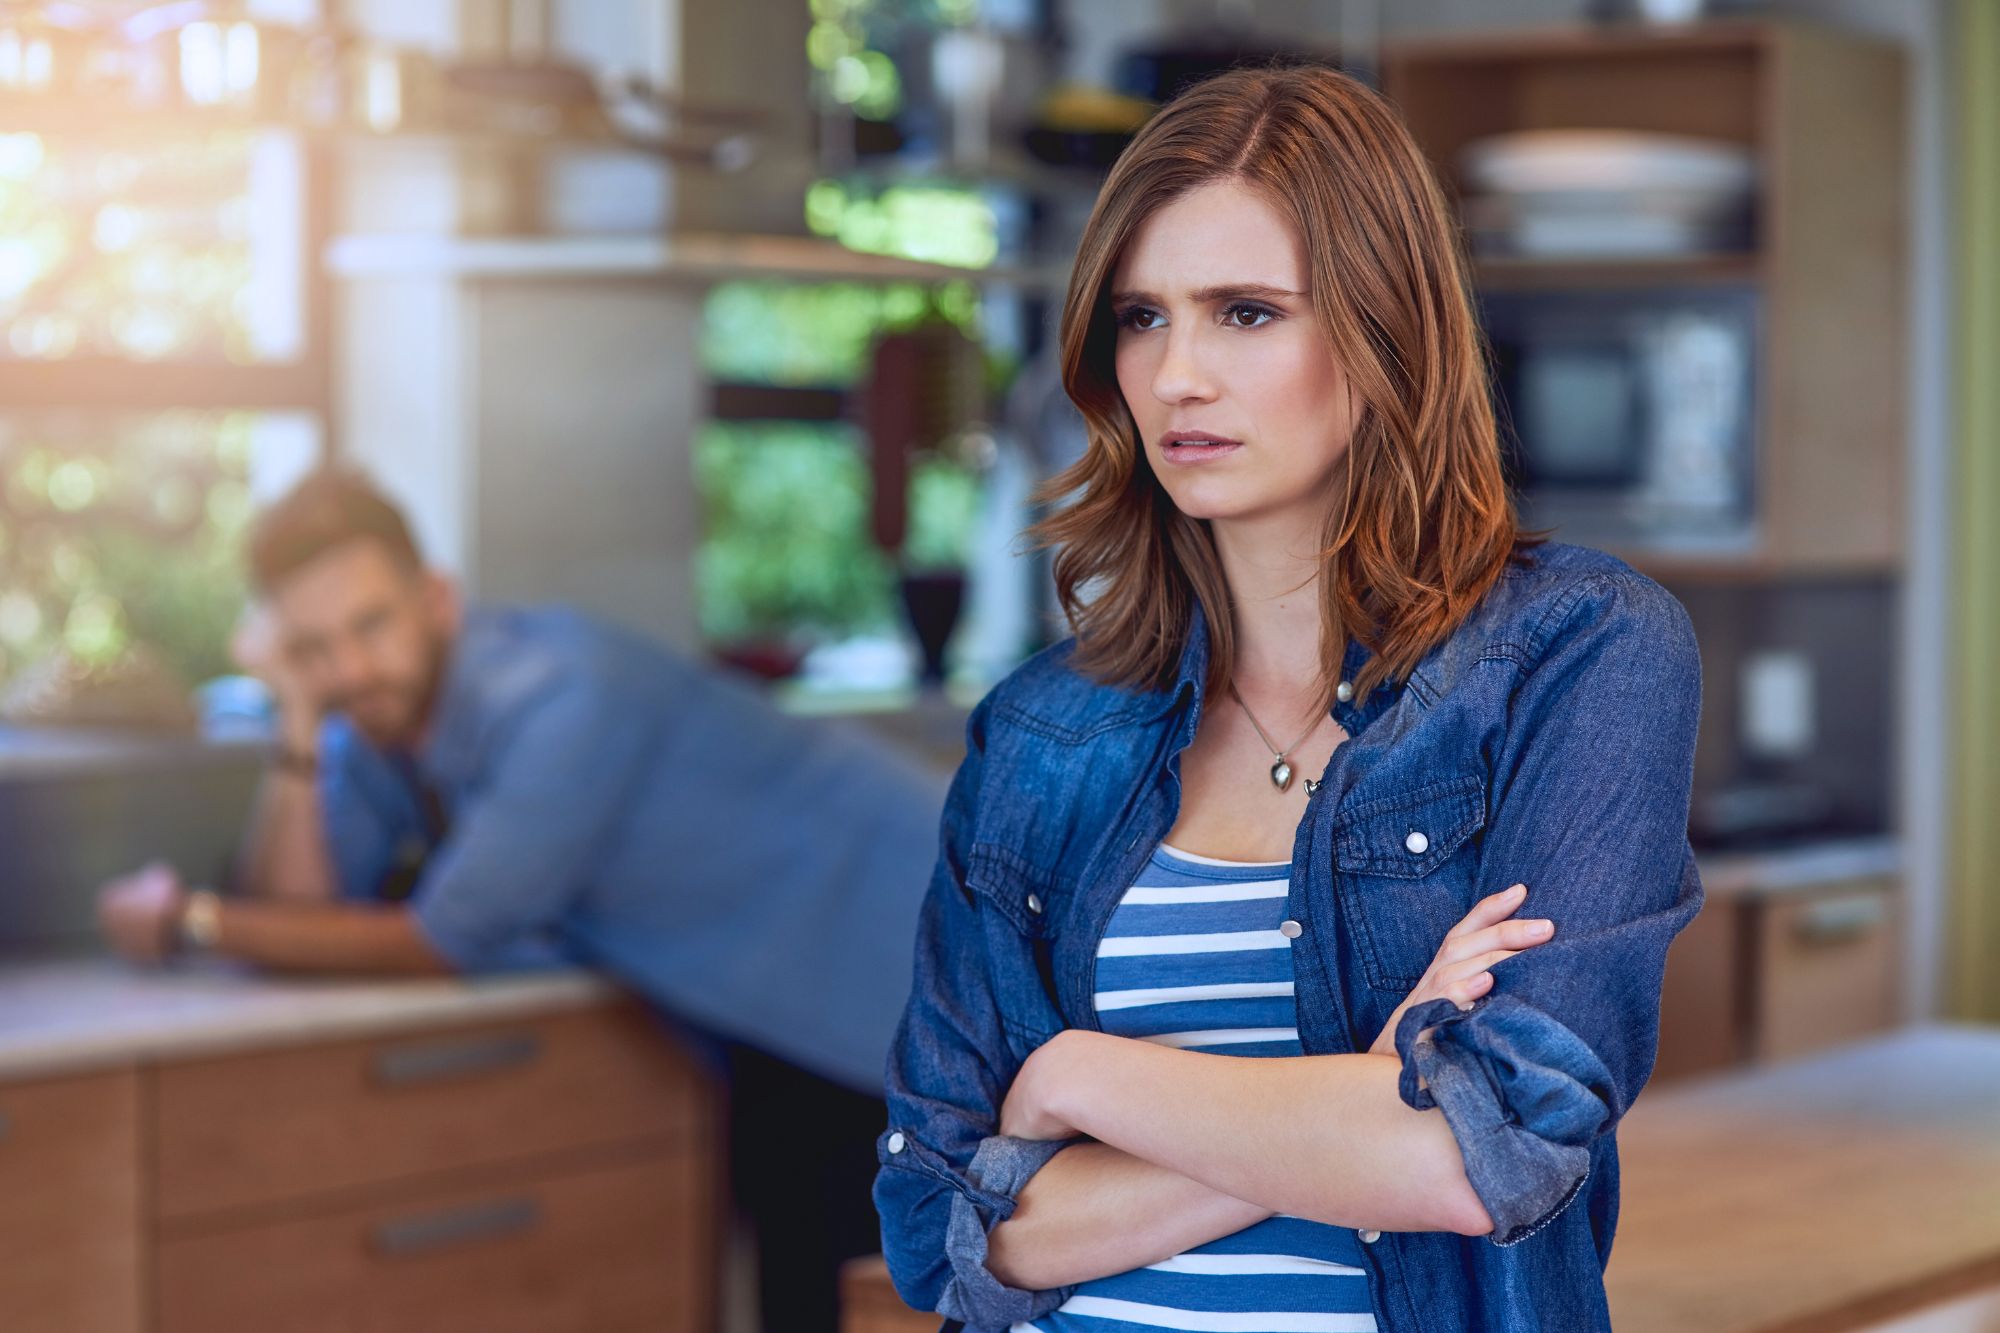 Woman with arms crossed stands in kitchen considering What To Do and Wondering “Should I Get A Divorce?”. Irritated husband in background watches her.